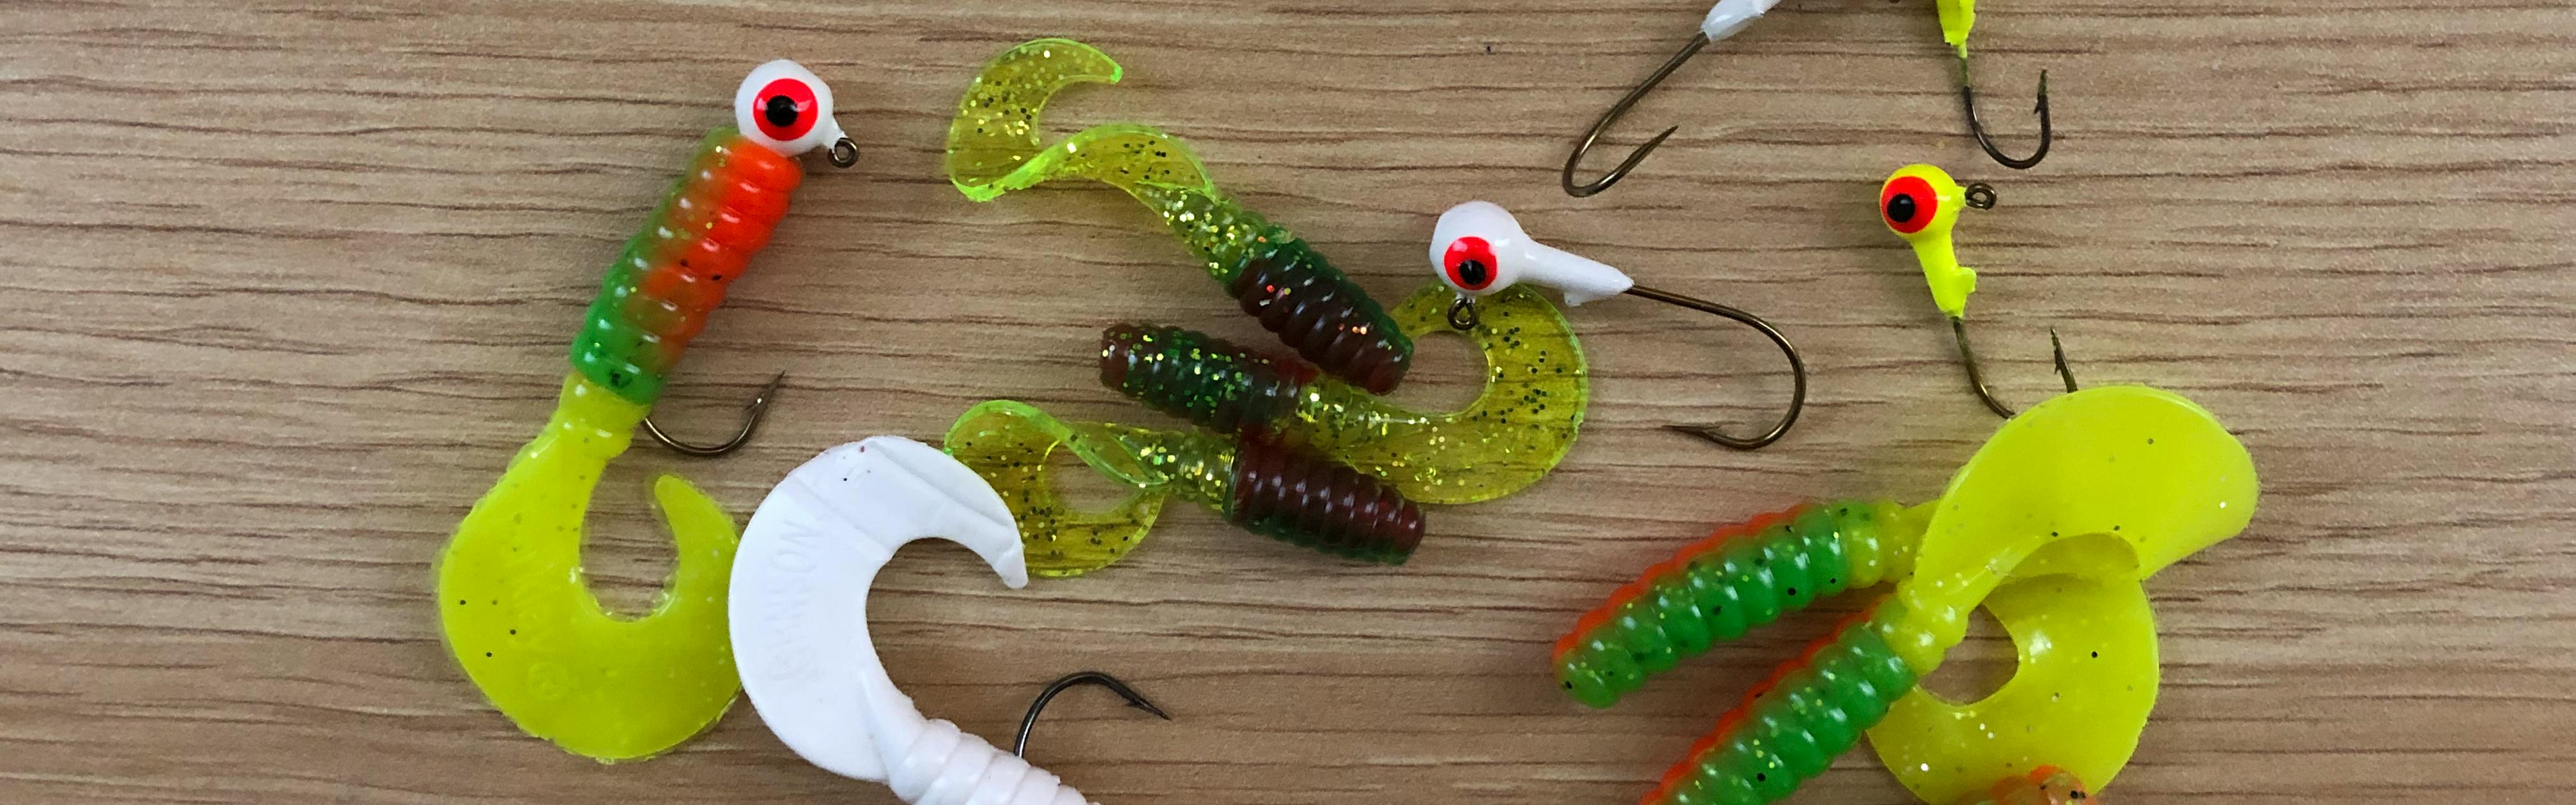 New Artificial Big Worm Fishing Soft Lure Saltwater Freshwater Swimbait Big Tail 